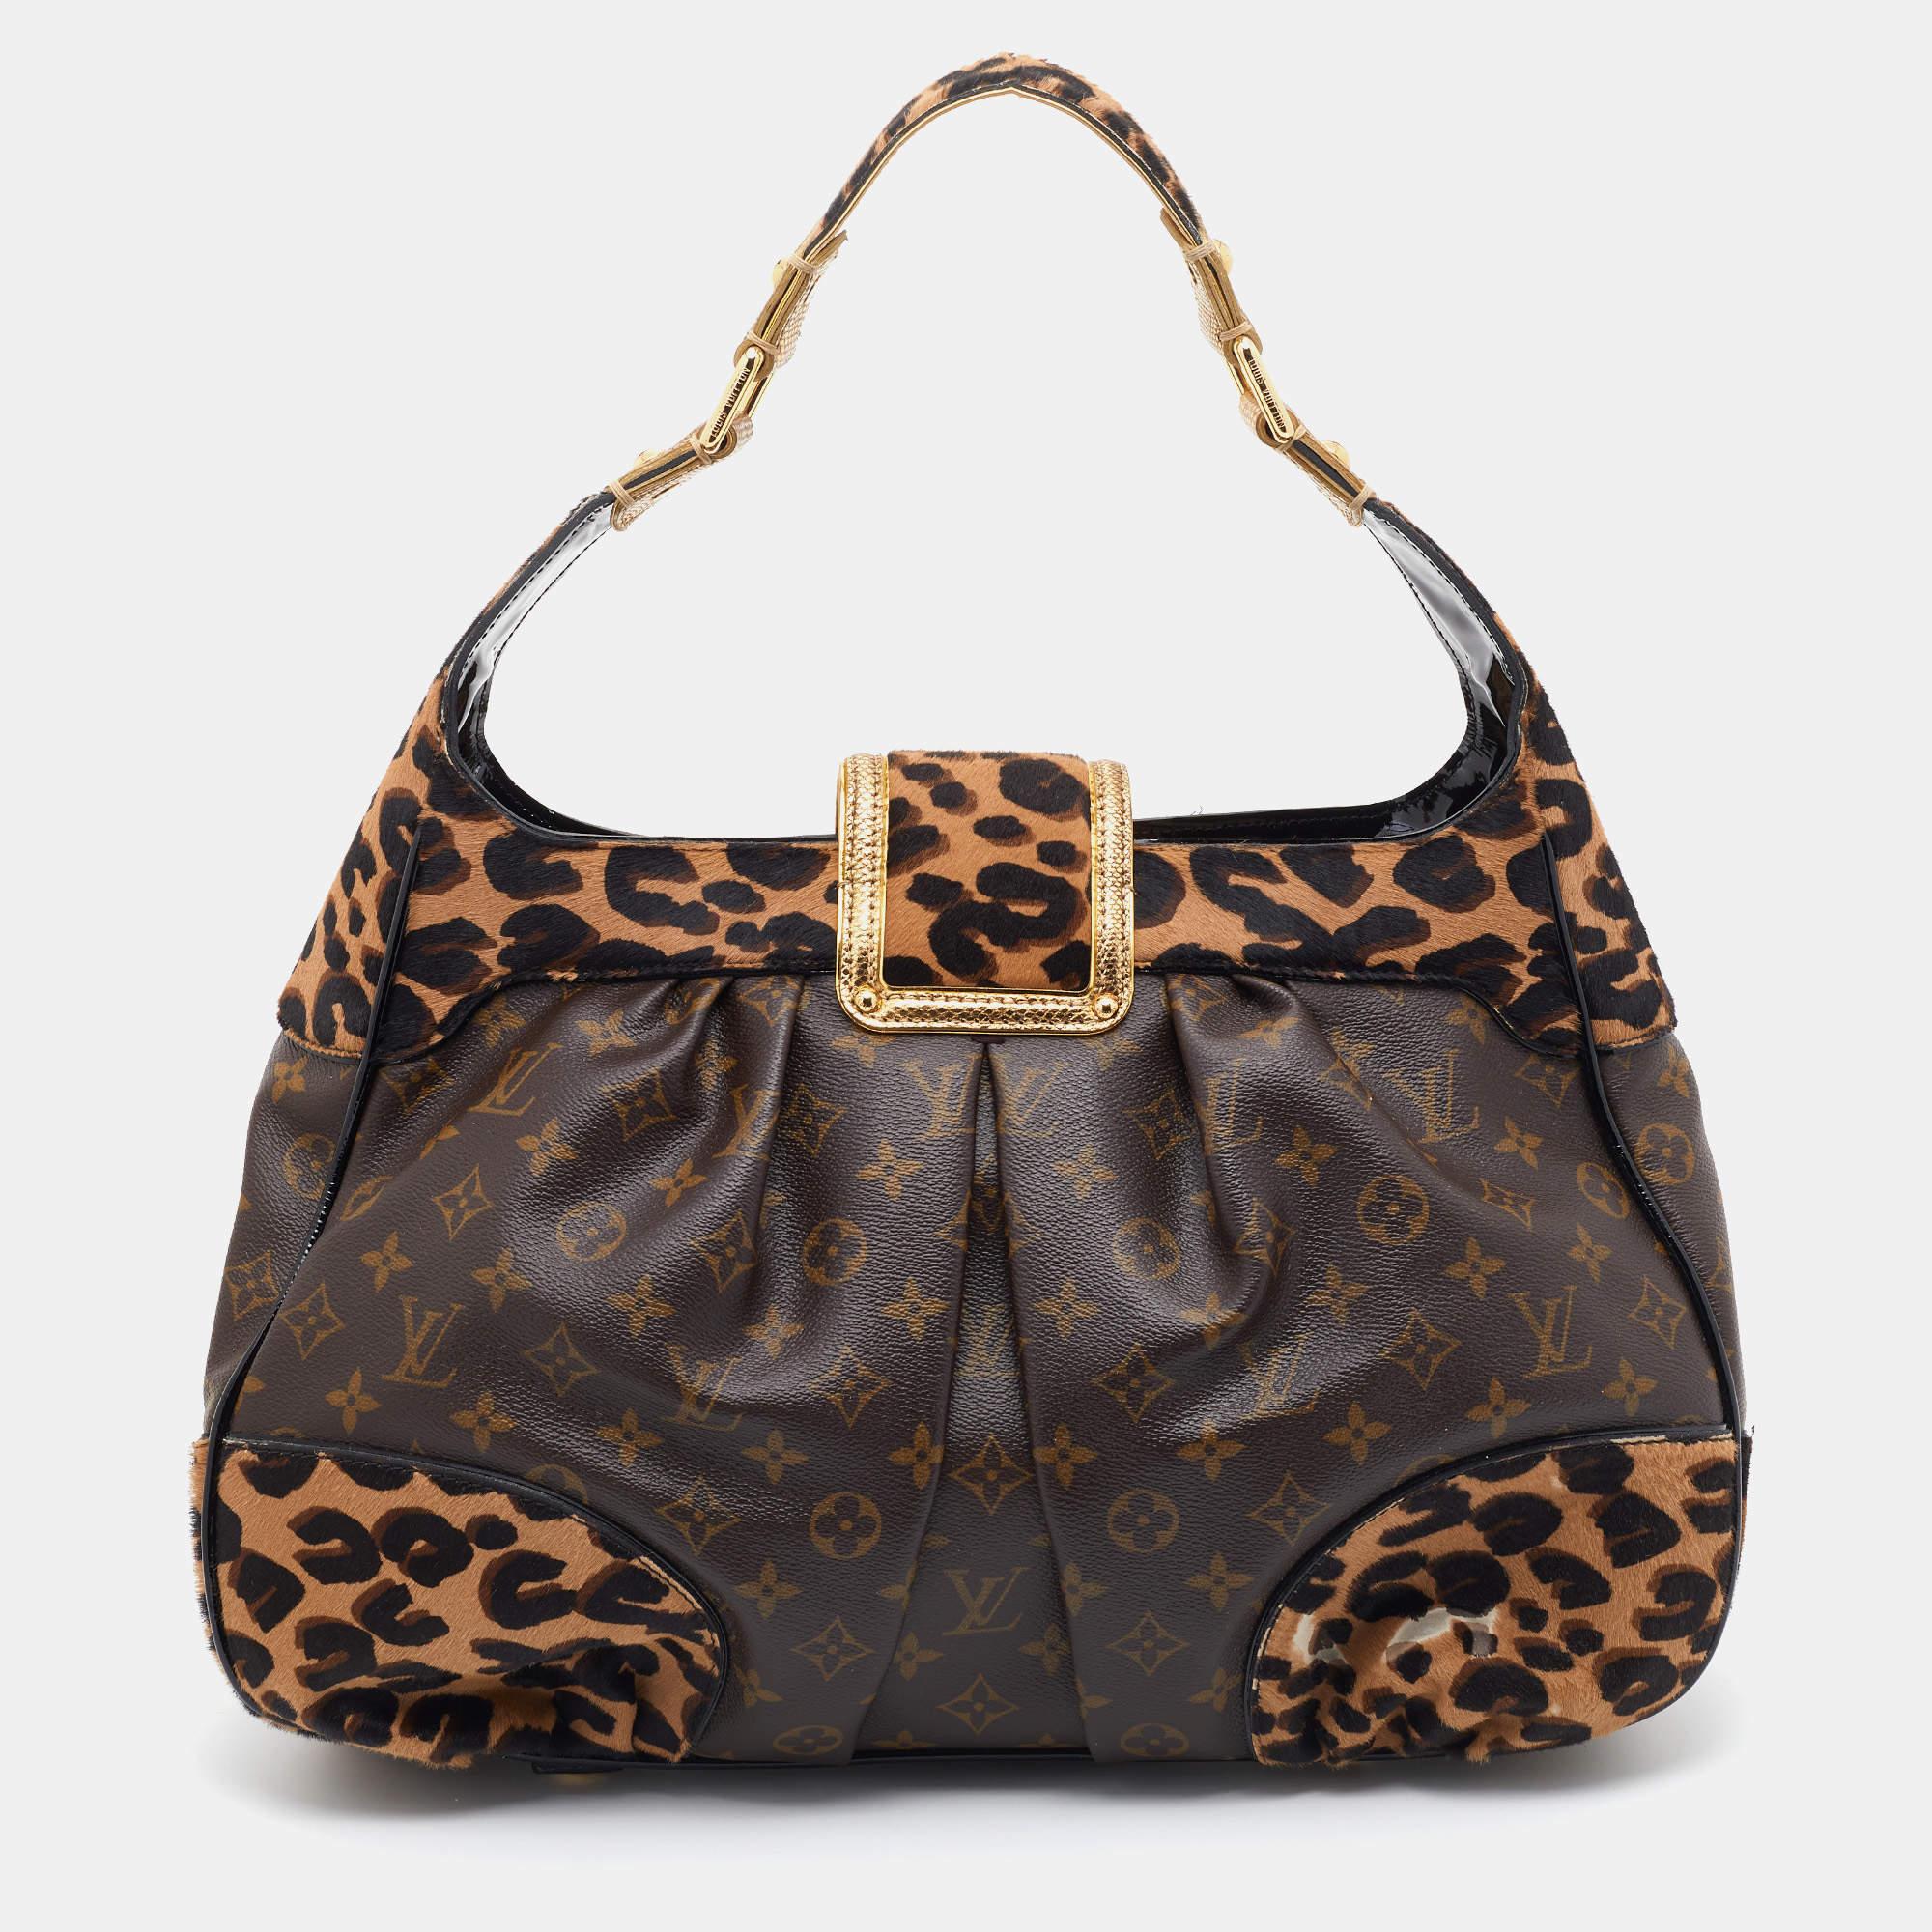 Louis Vuitton's Limited Edition Polly is made from leopard-print calf hair, Karung leather, and with the charm of LV's Monogram canvas. The spacious interior of this plush bag is lined with Alcantara. Invest in this appealing creation